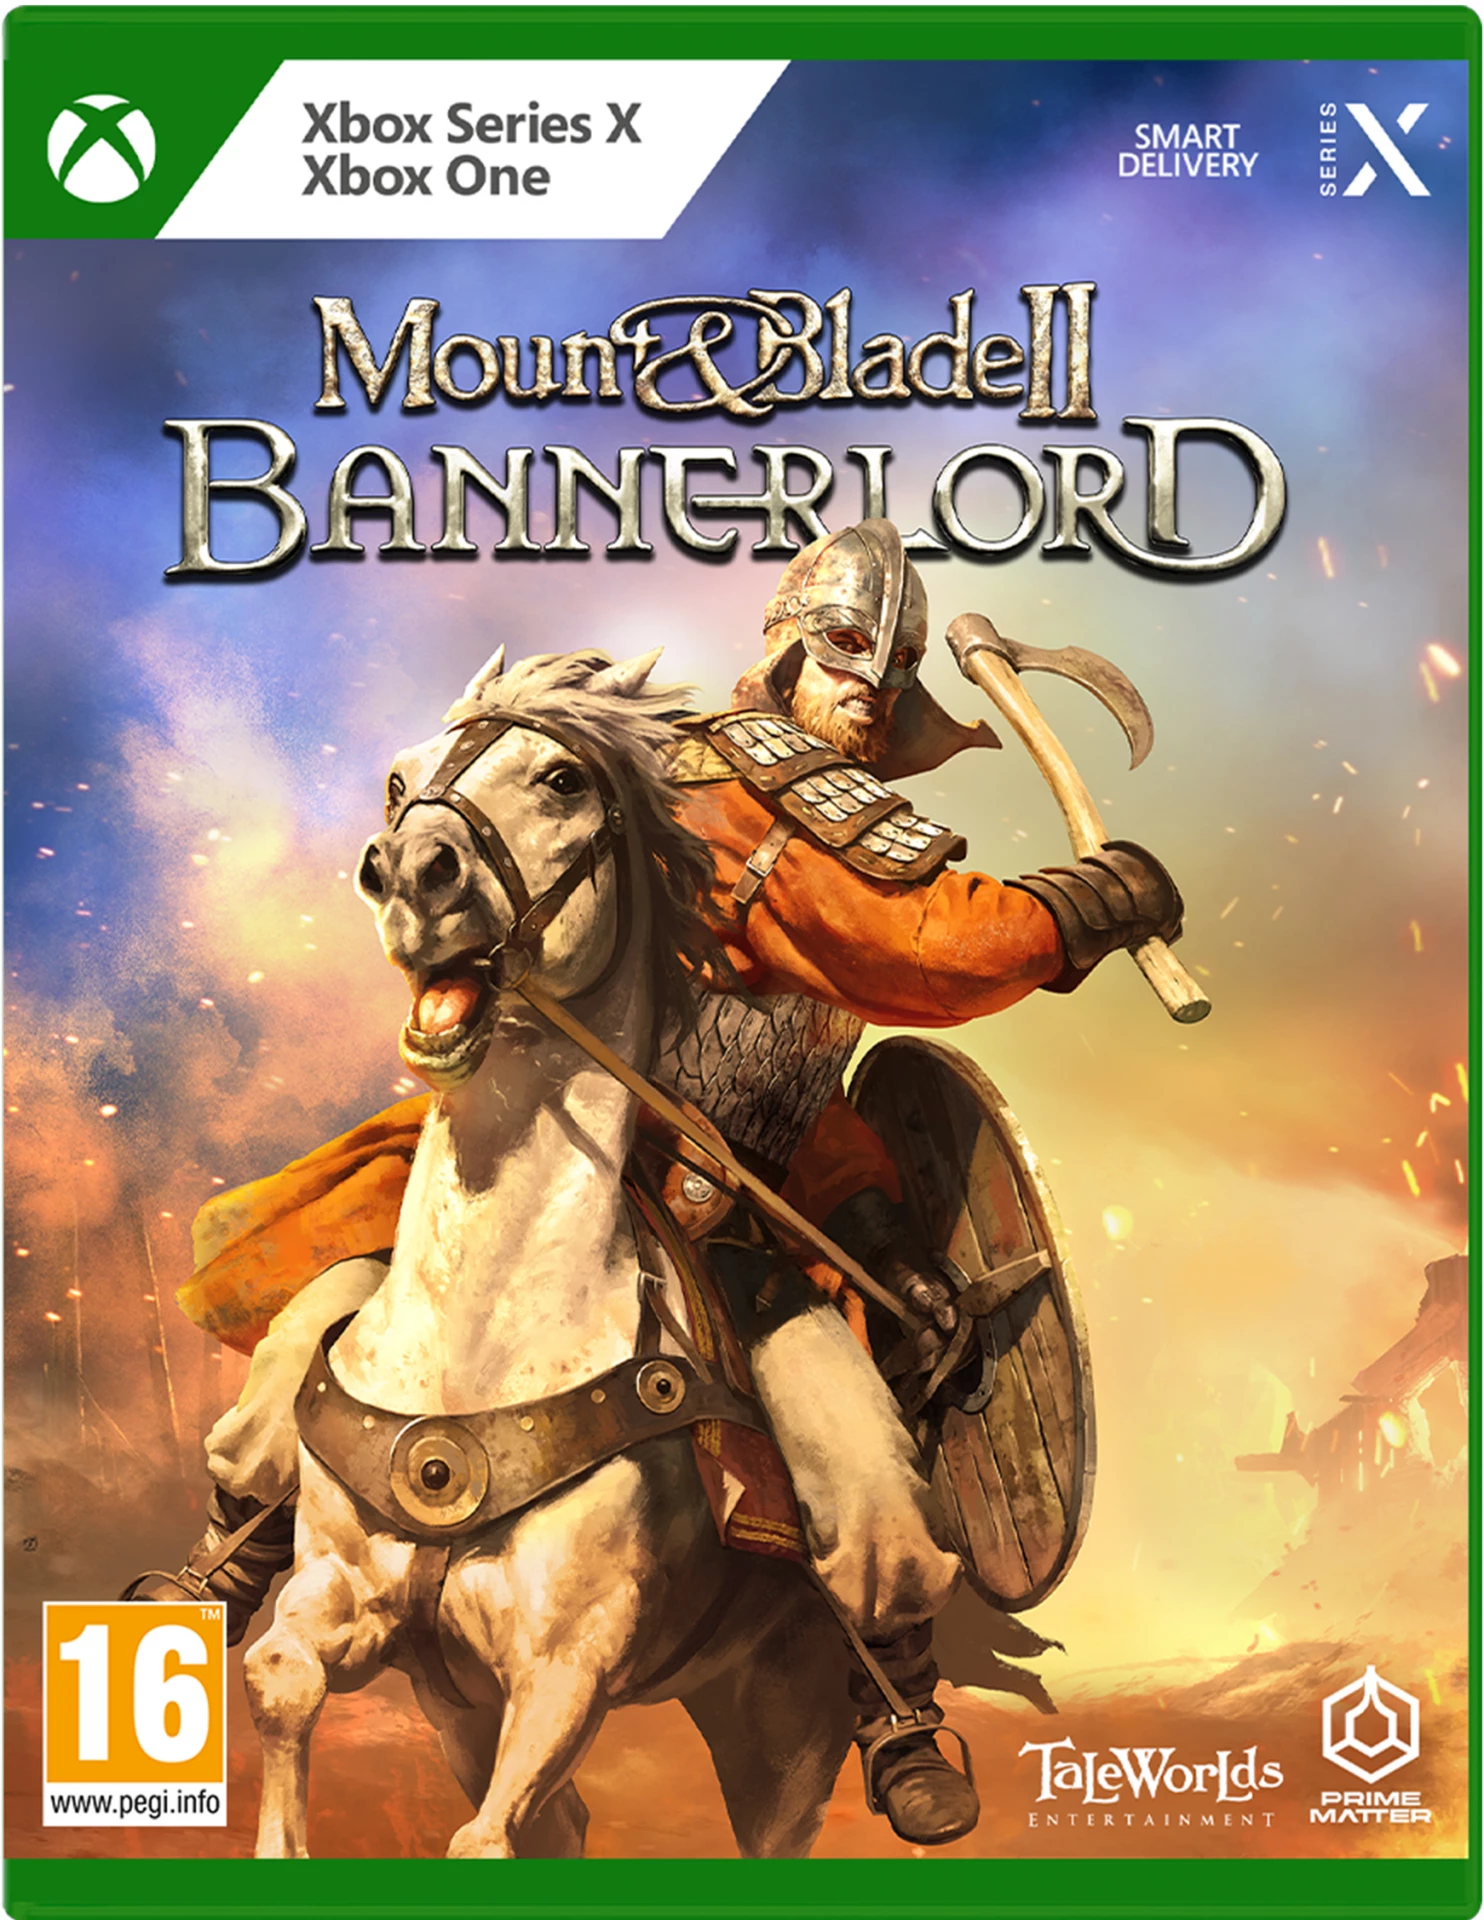 Mount & Blade 2: Bannerlord (Xbox Series X), Taleworlds Entertainment